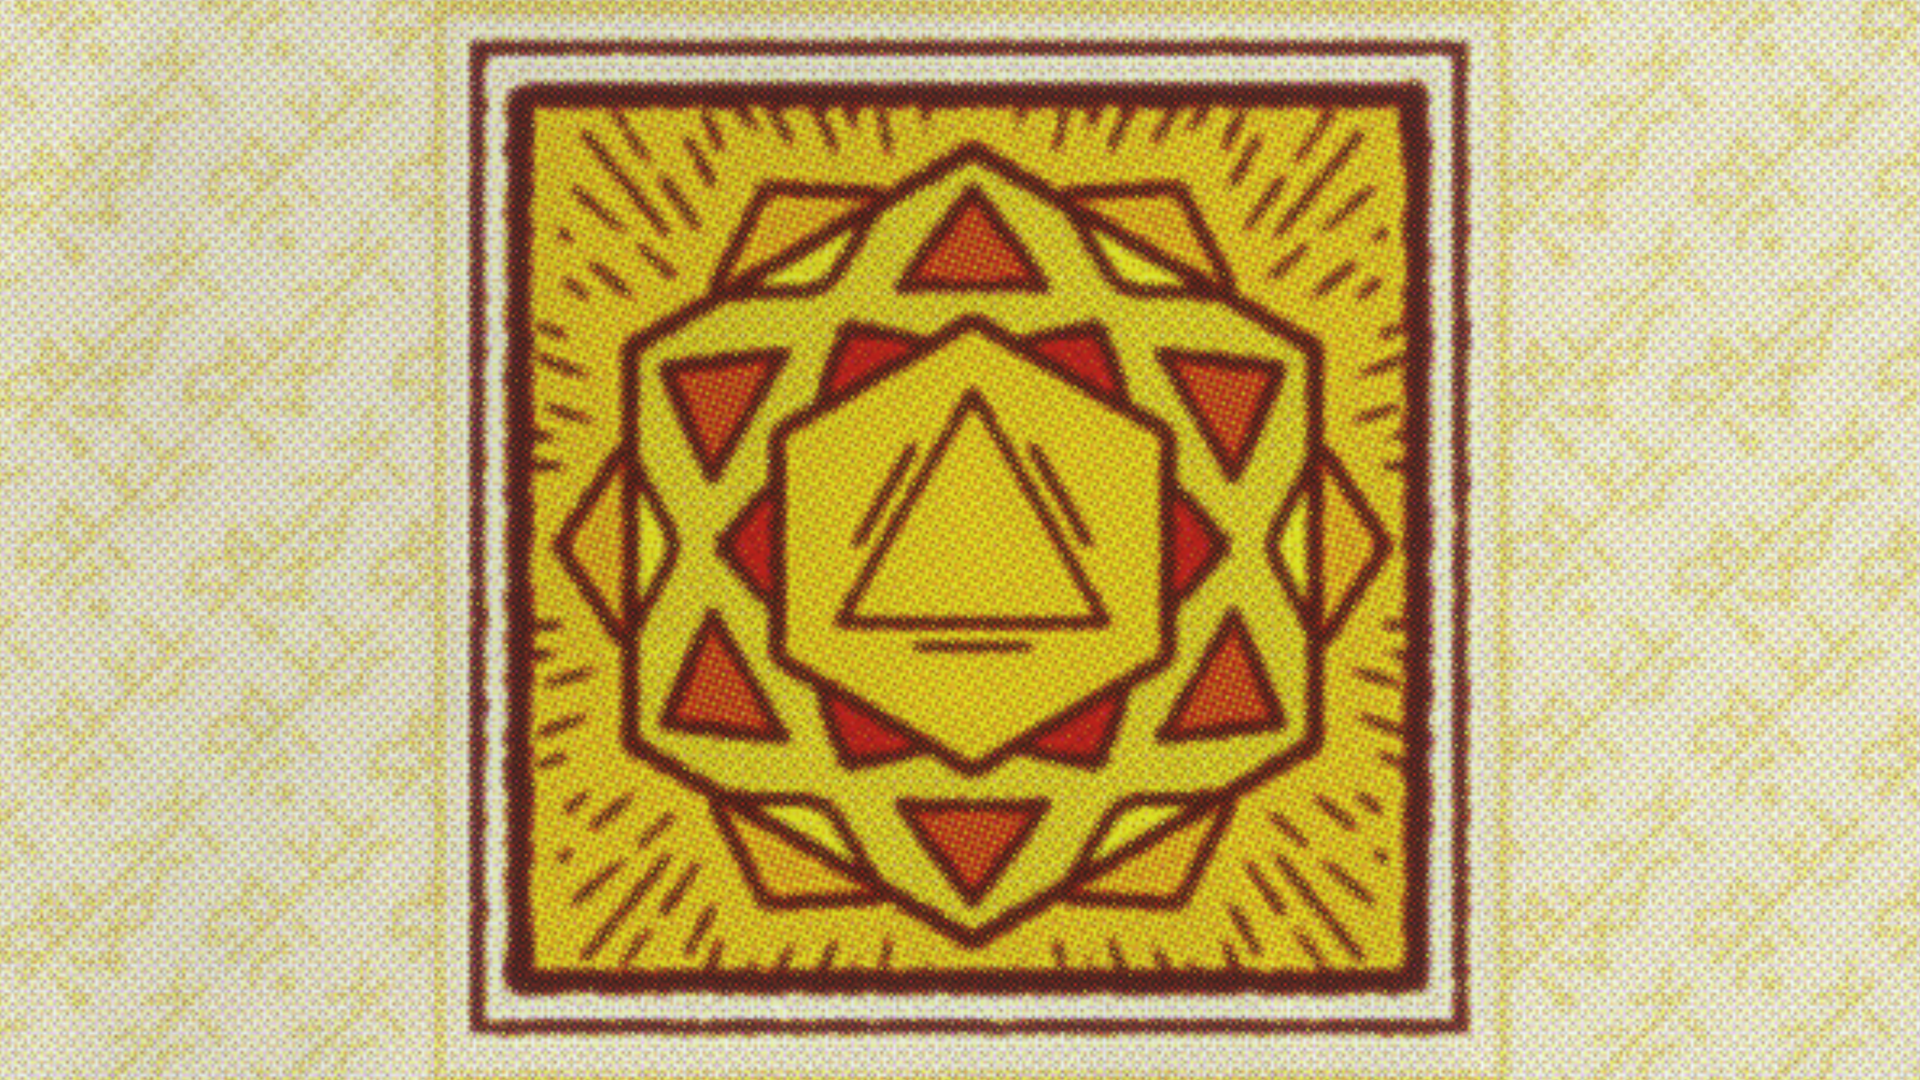 Icon for Sacred Geometry